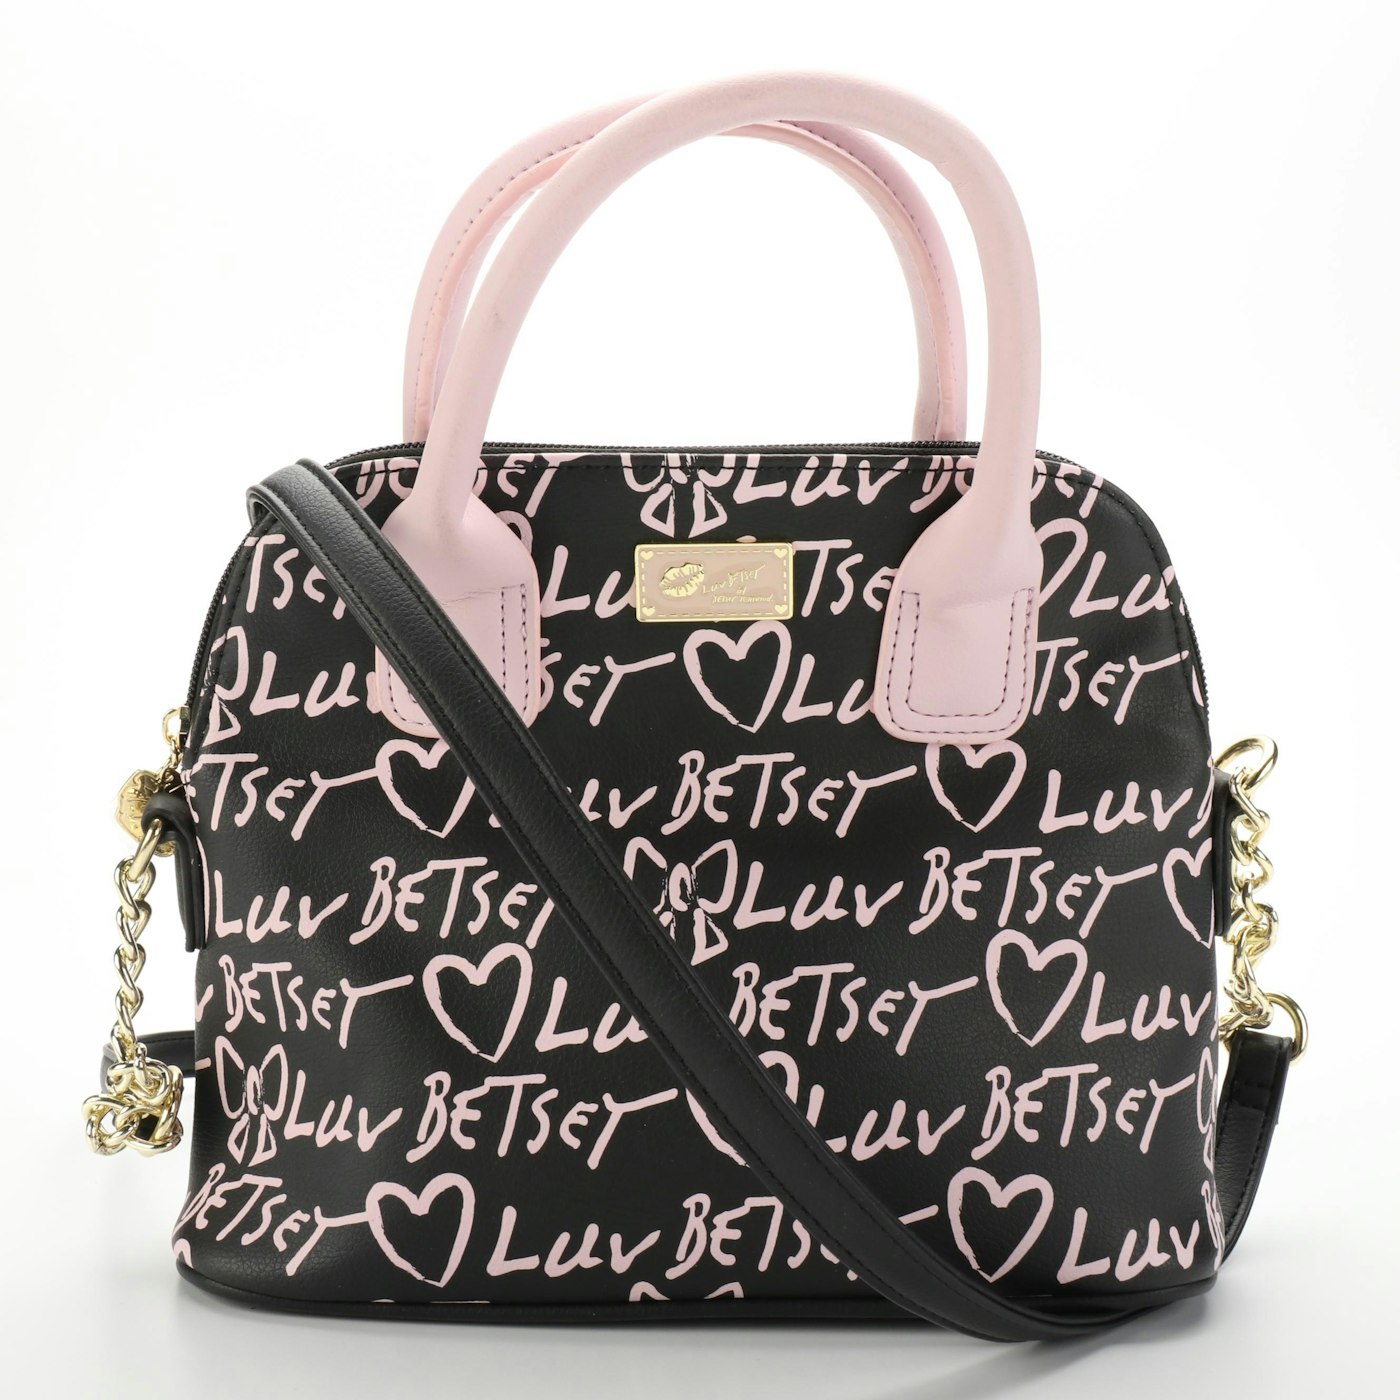 Betsey Johnson Brands Crossbody and Two-Way Bags with Pouch in Faux ...